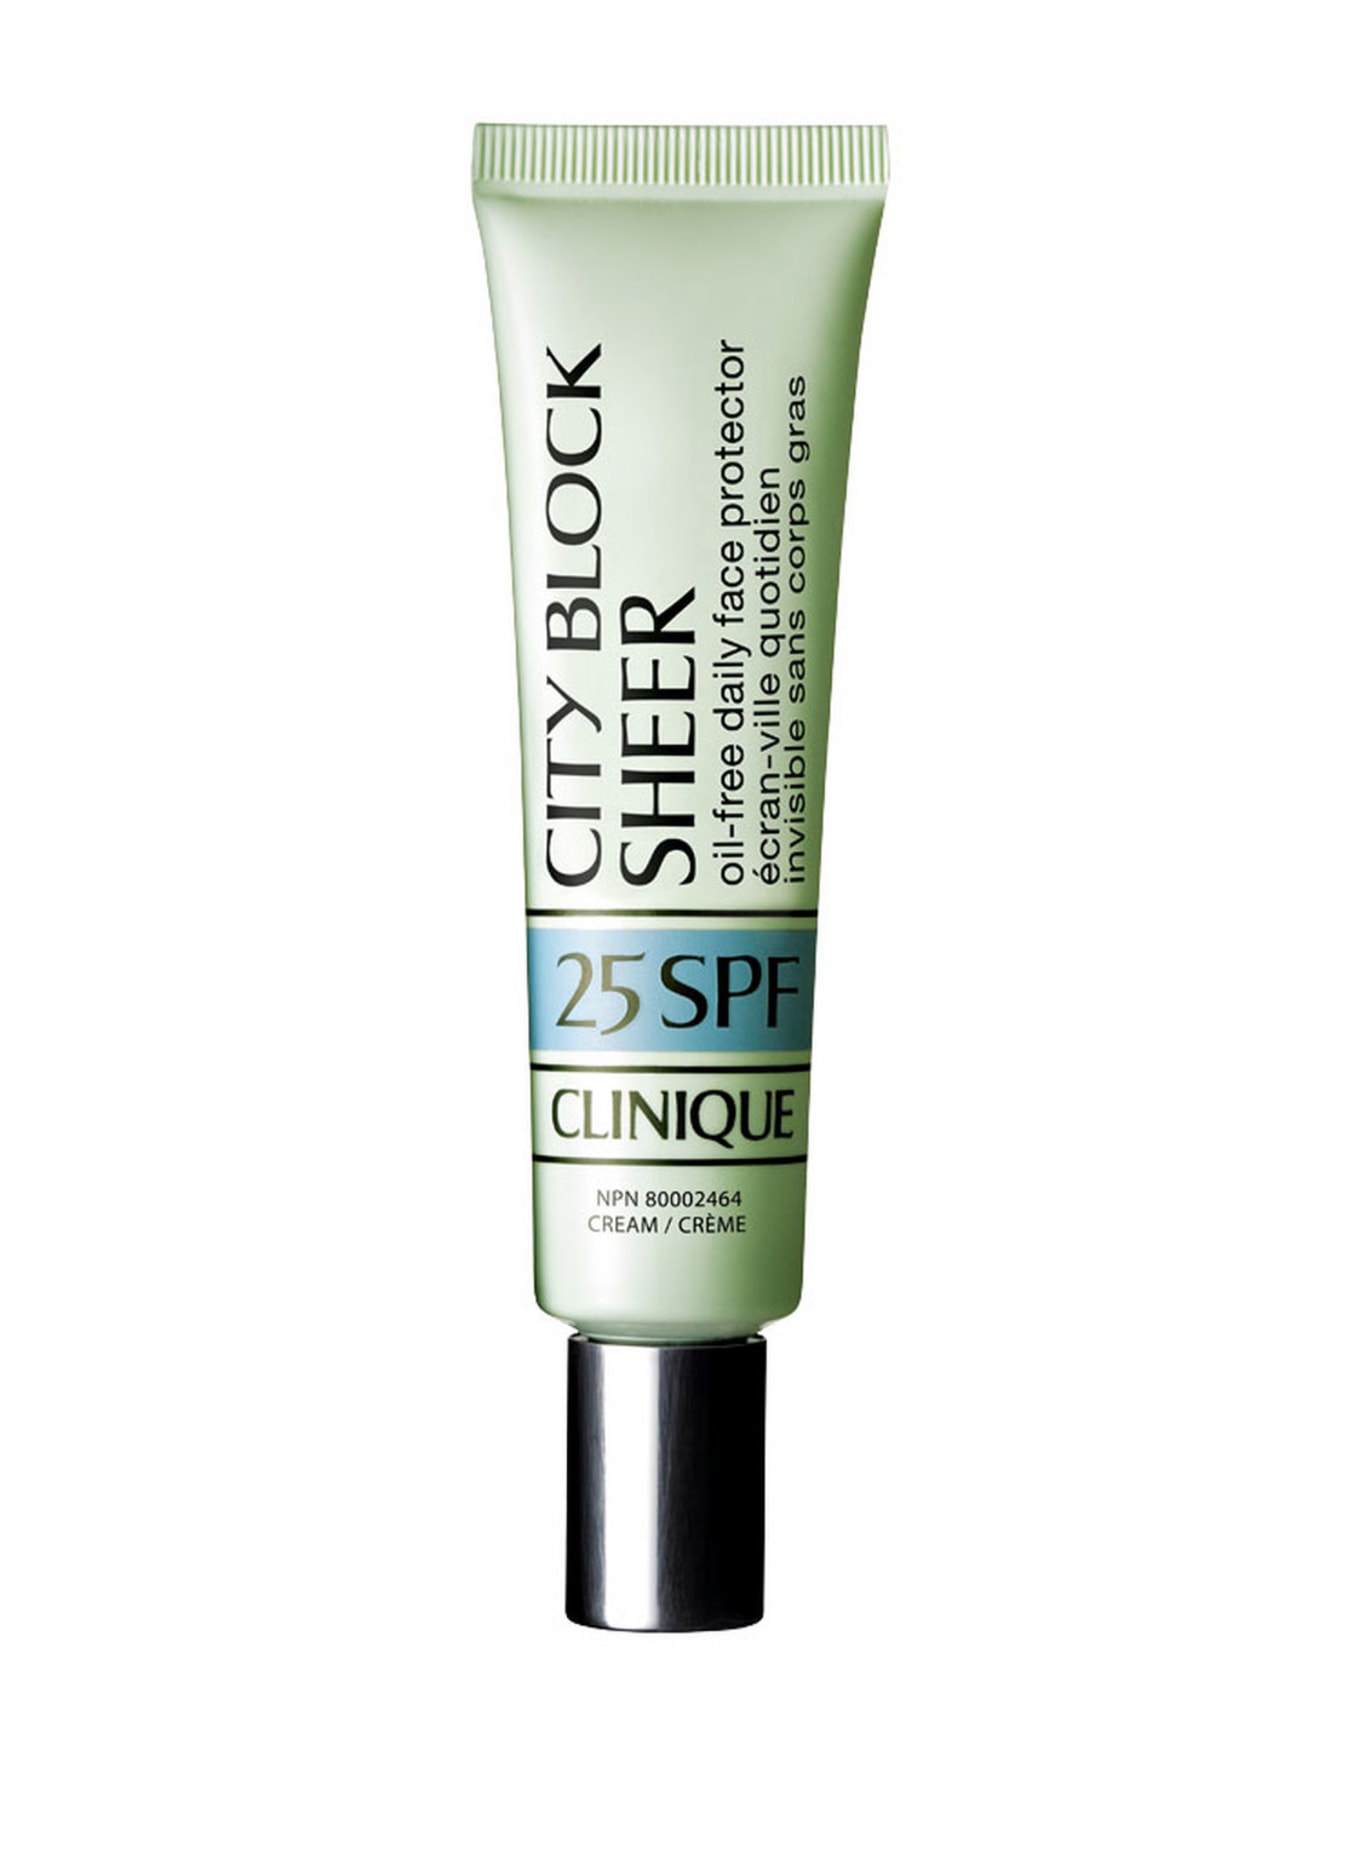 CLINIQUE CITY BLOCK SHEER OIL-FREE DAILY FACE PROTECTOR SPF 25 (Obrázek 1)